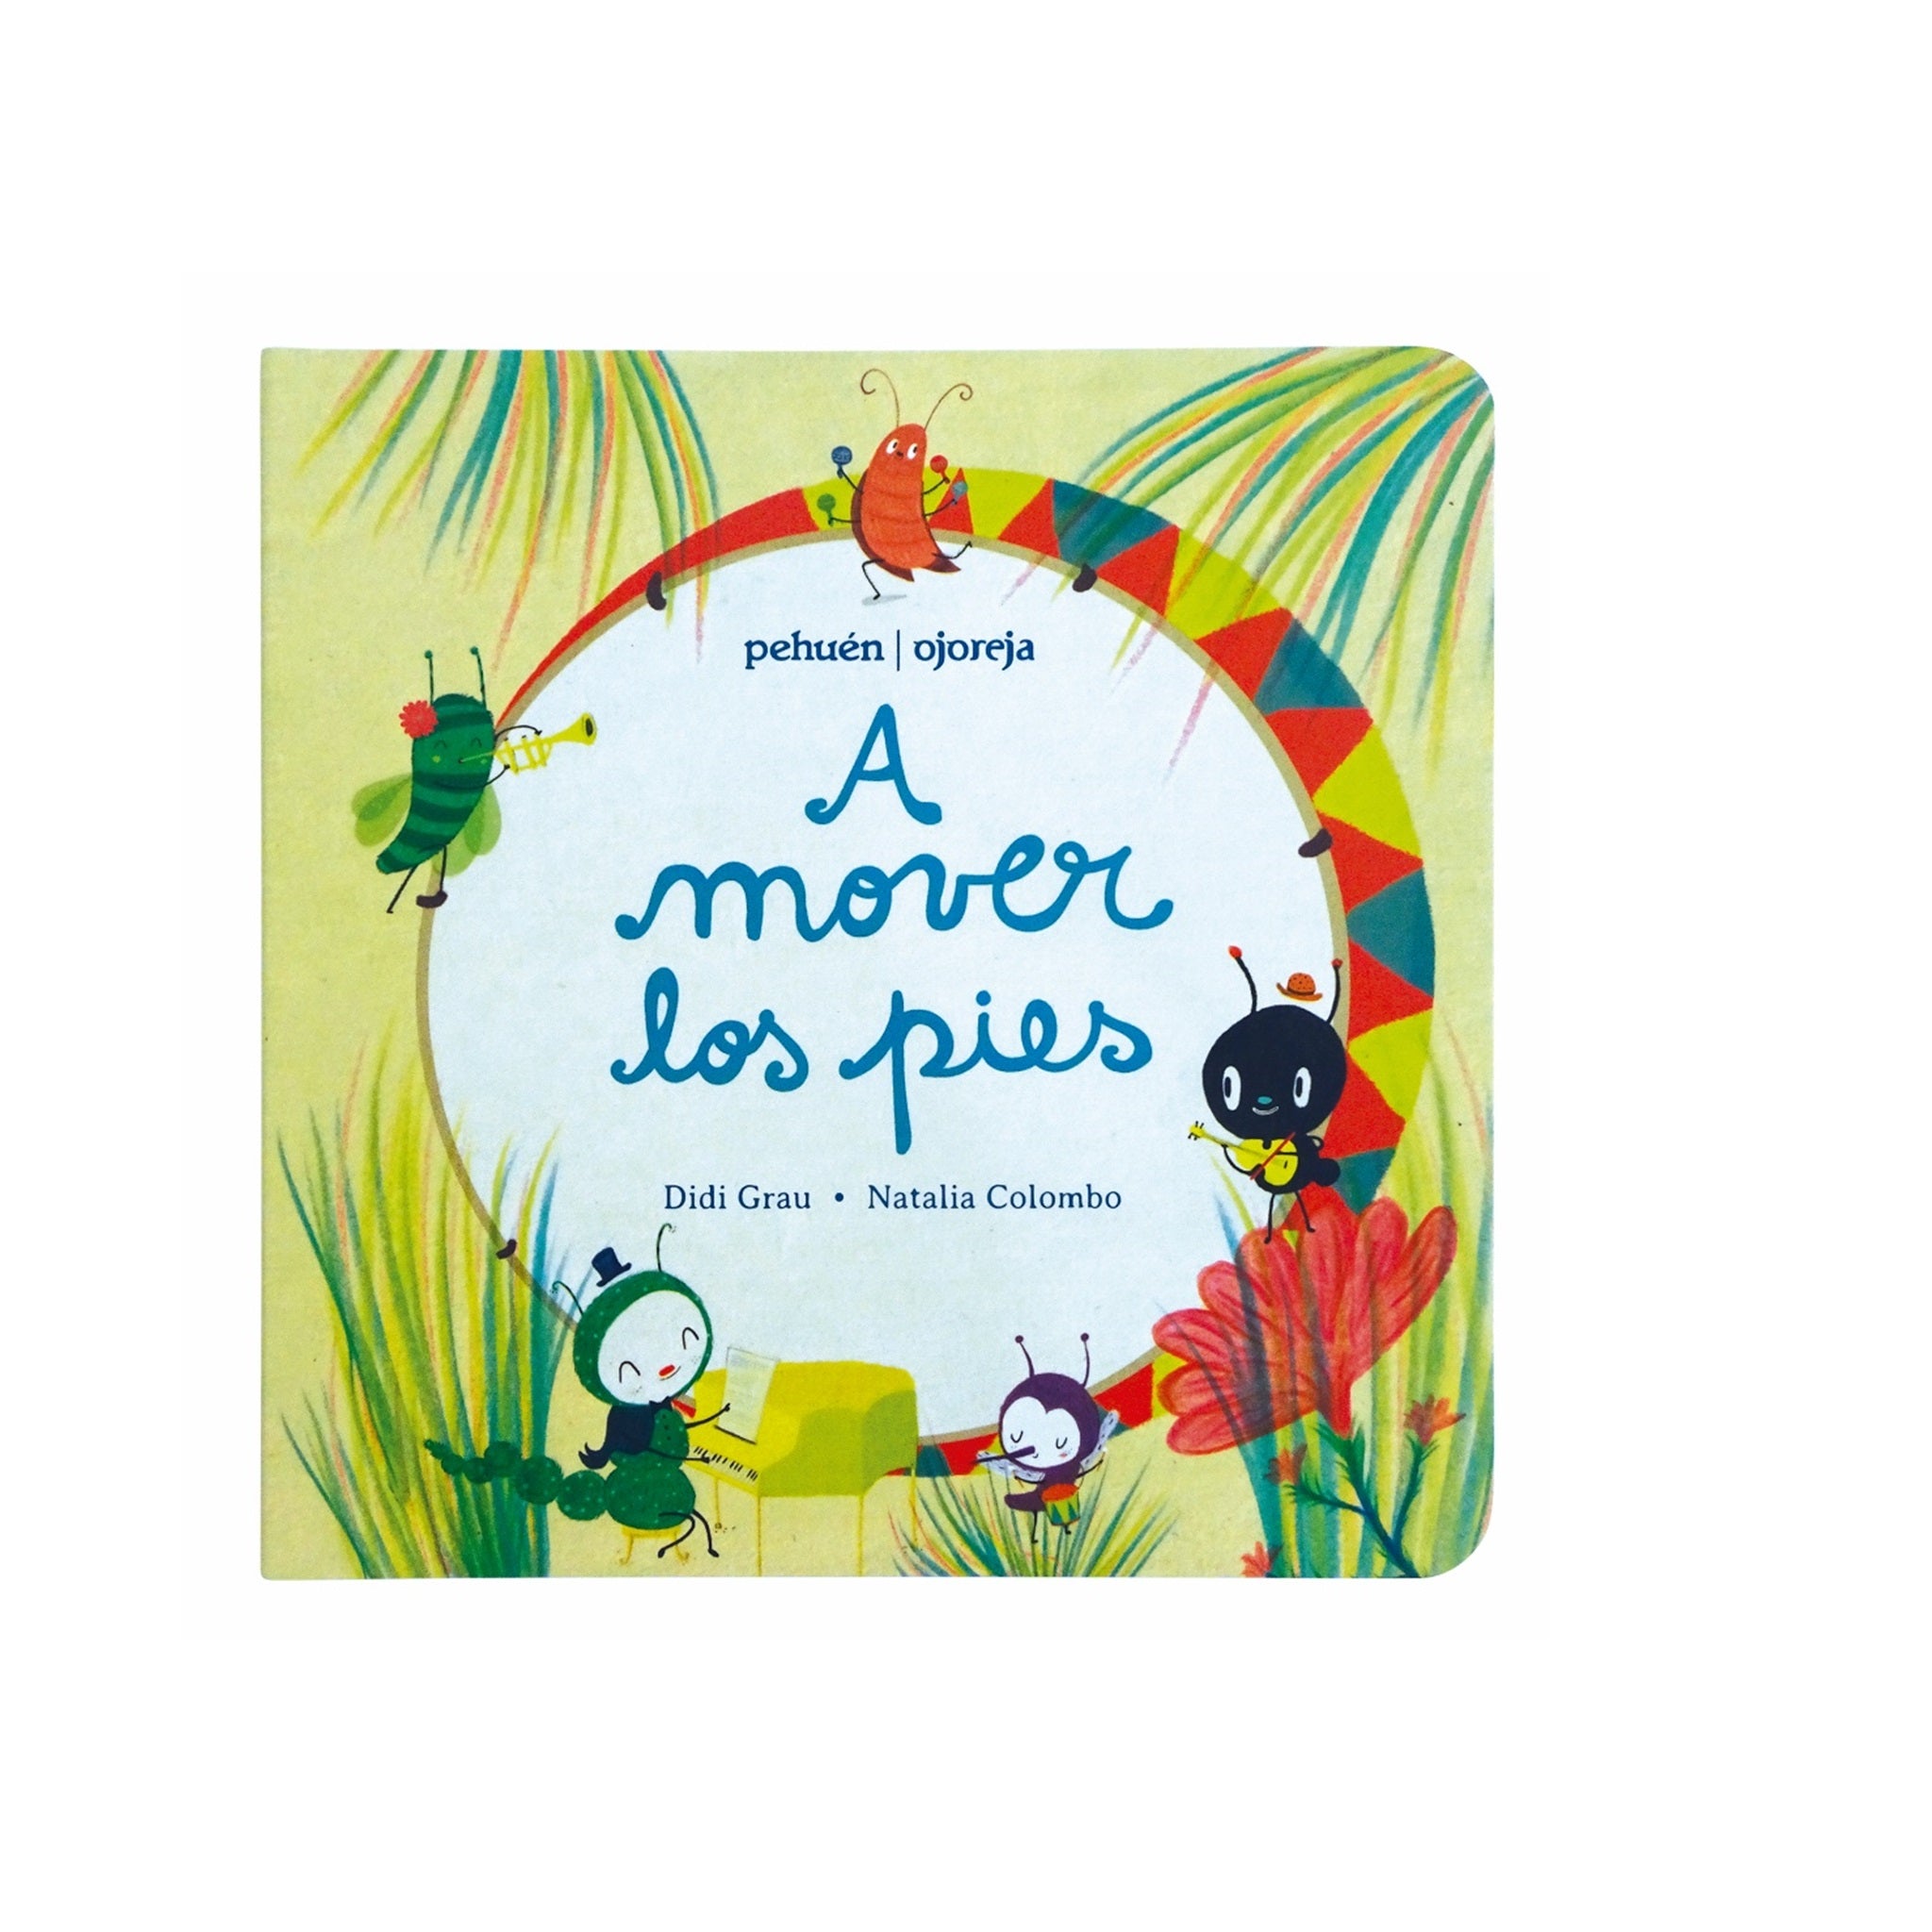 A MOVER LOS PIES - Masterwise